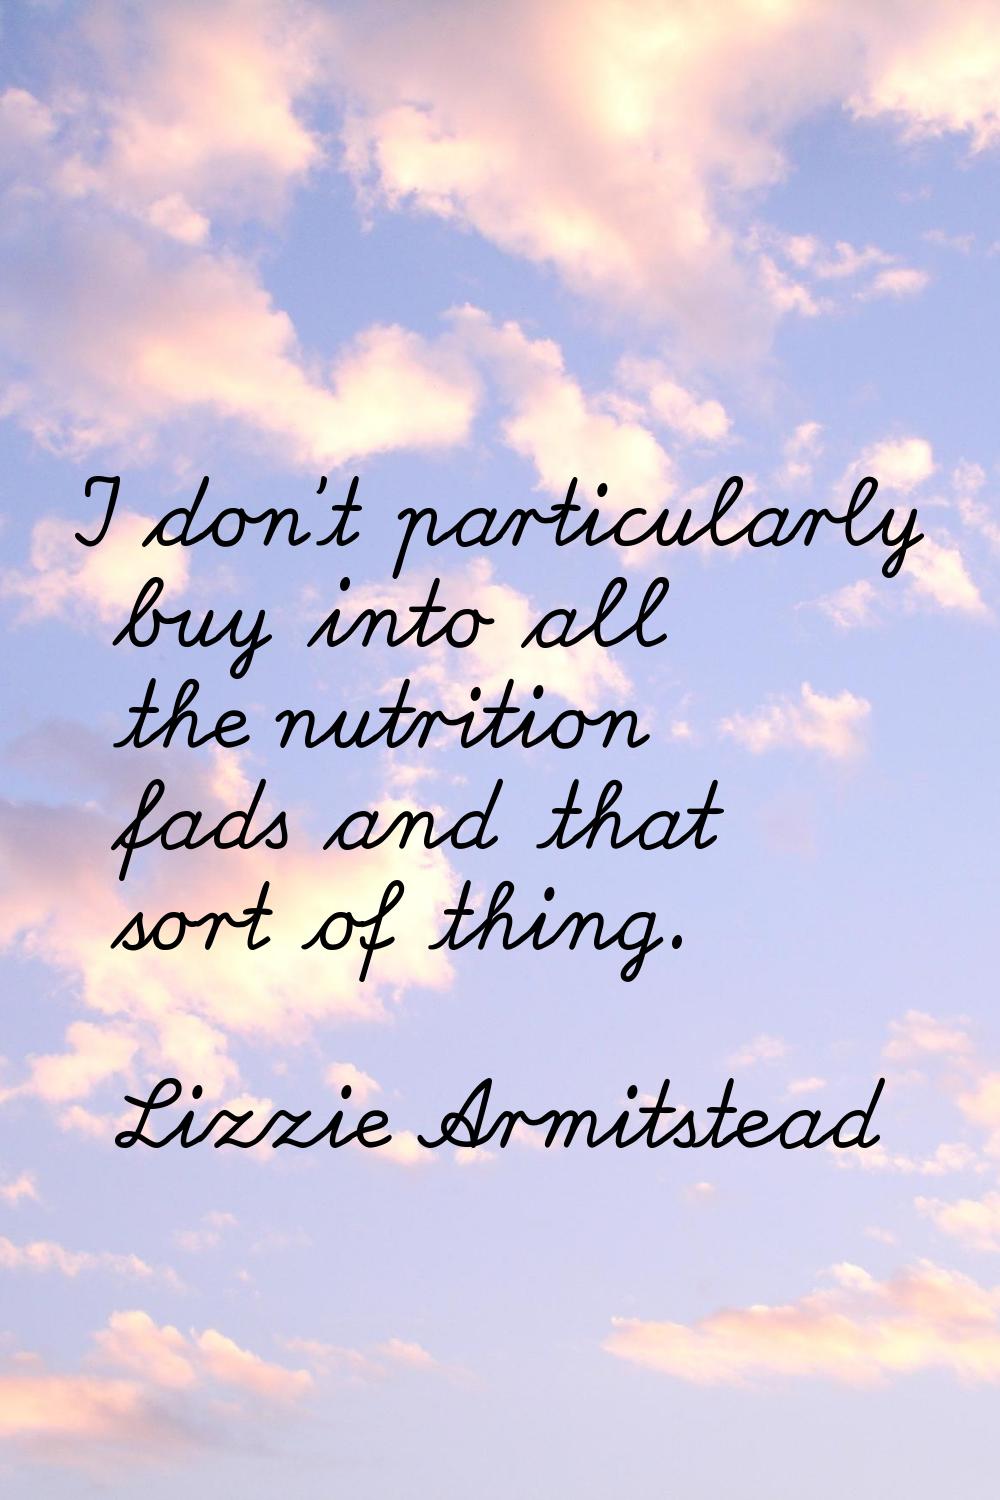 I don't particularly buy into all the nutrition fads and that sort of thing.